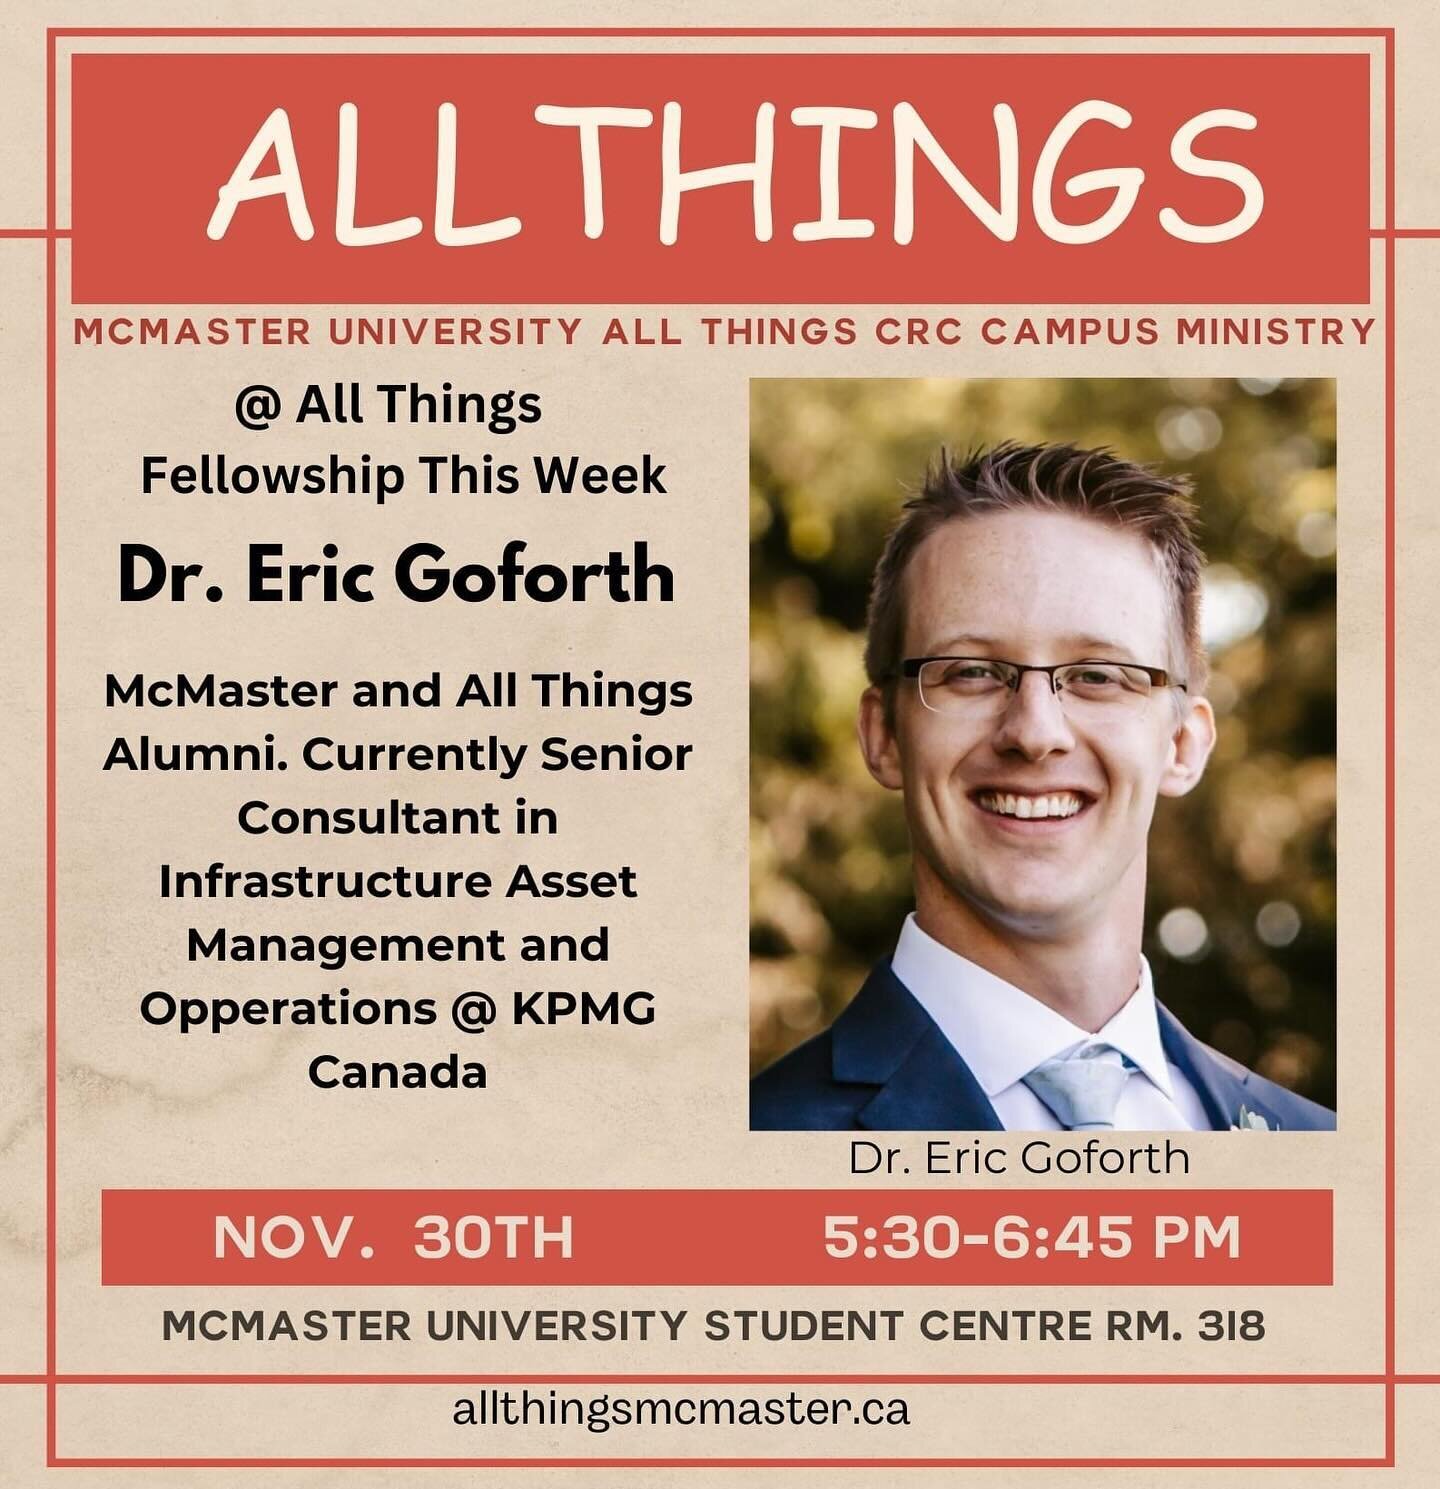 Dr. Eric Goforth @ All Things this Thursday. Dr. Goforth is a McMaster and All Things Alumni. Eric will share lessons learned at Mac and insights he gleaned as he transitioned into the post pandemic work world. Come and join us! This will be the last